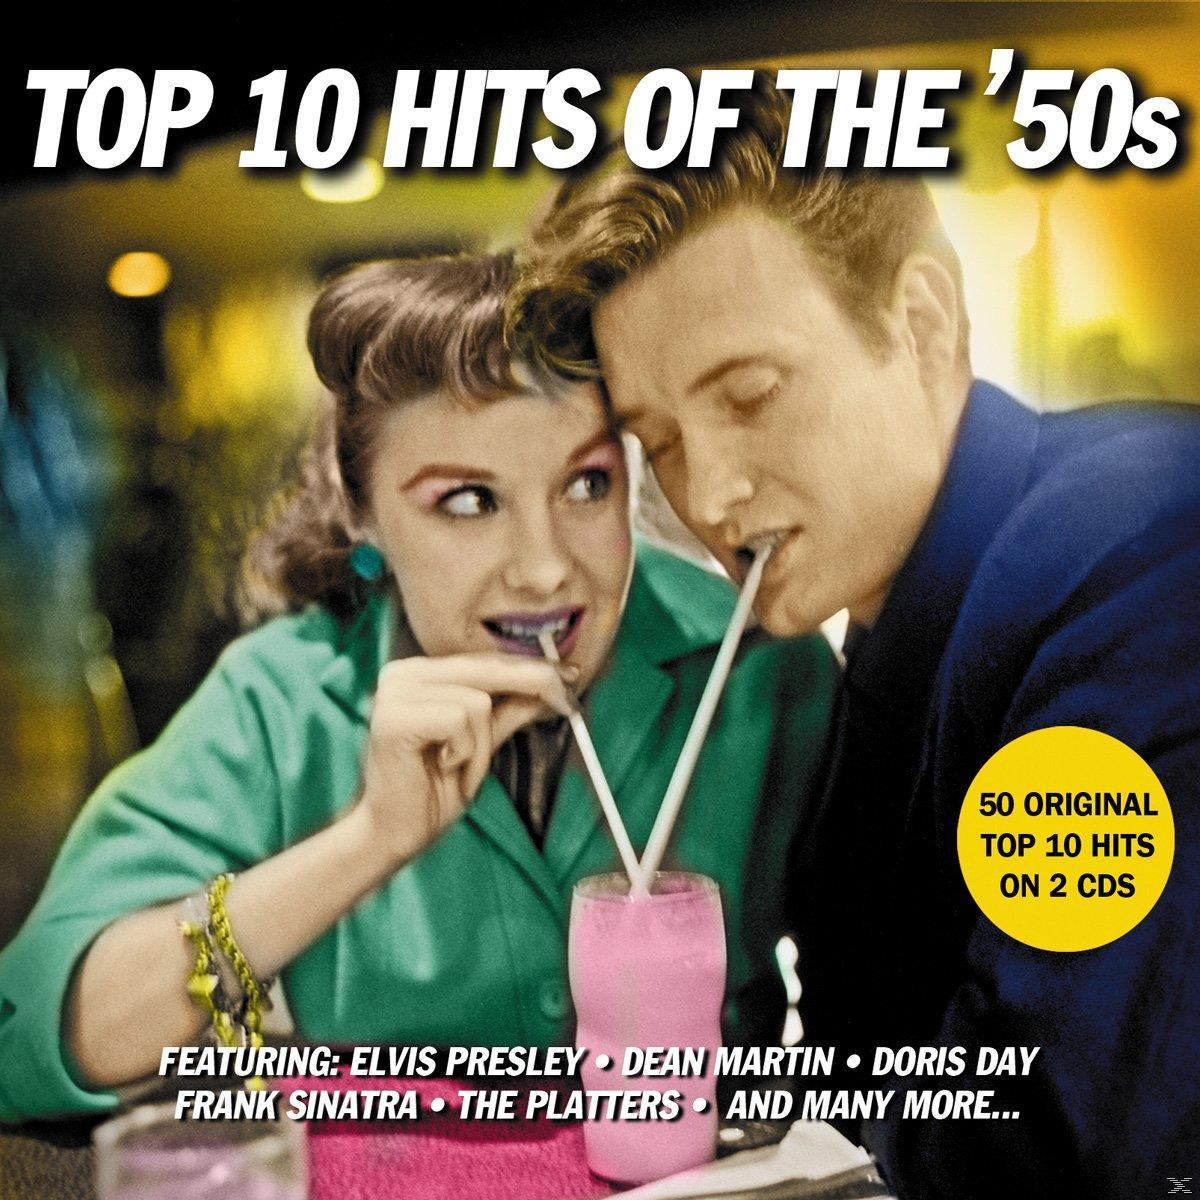 VARIOUS - Top 10 Of The 50s (CD) Hits 